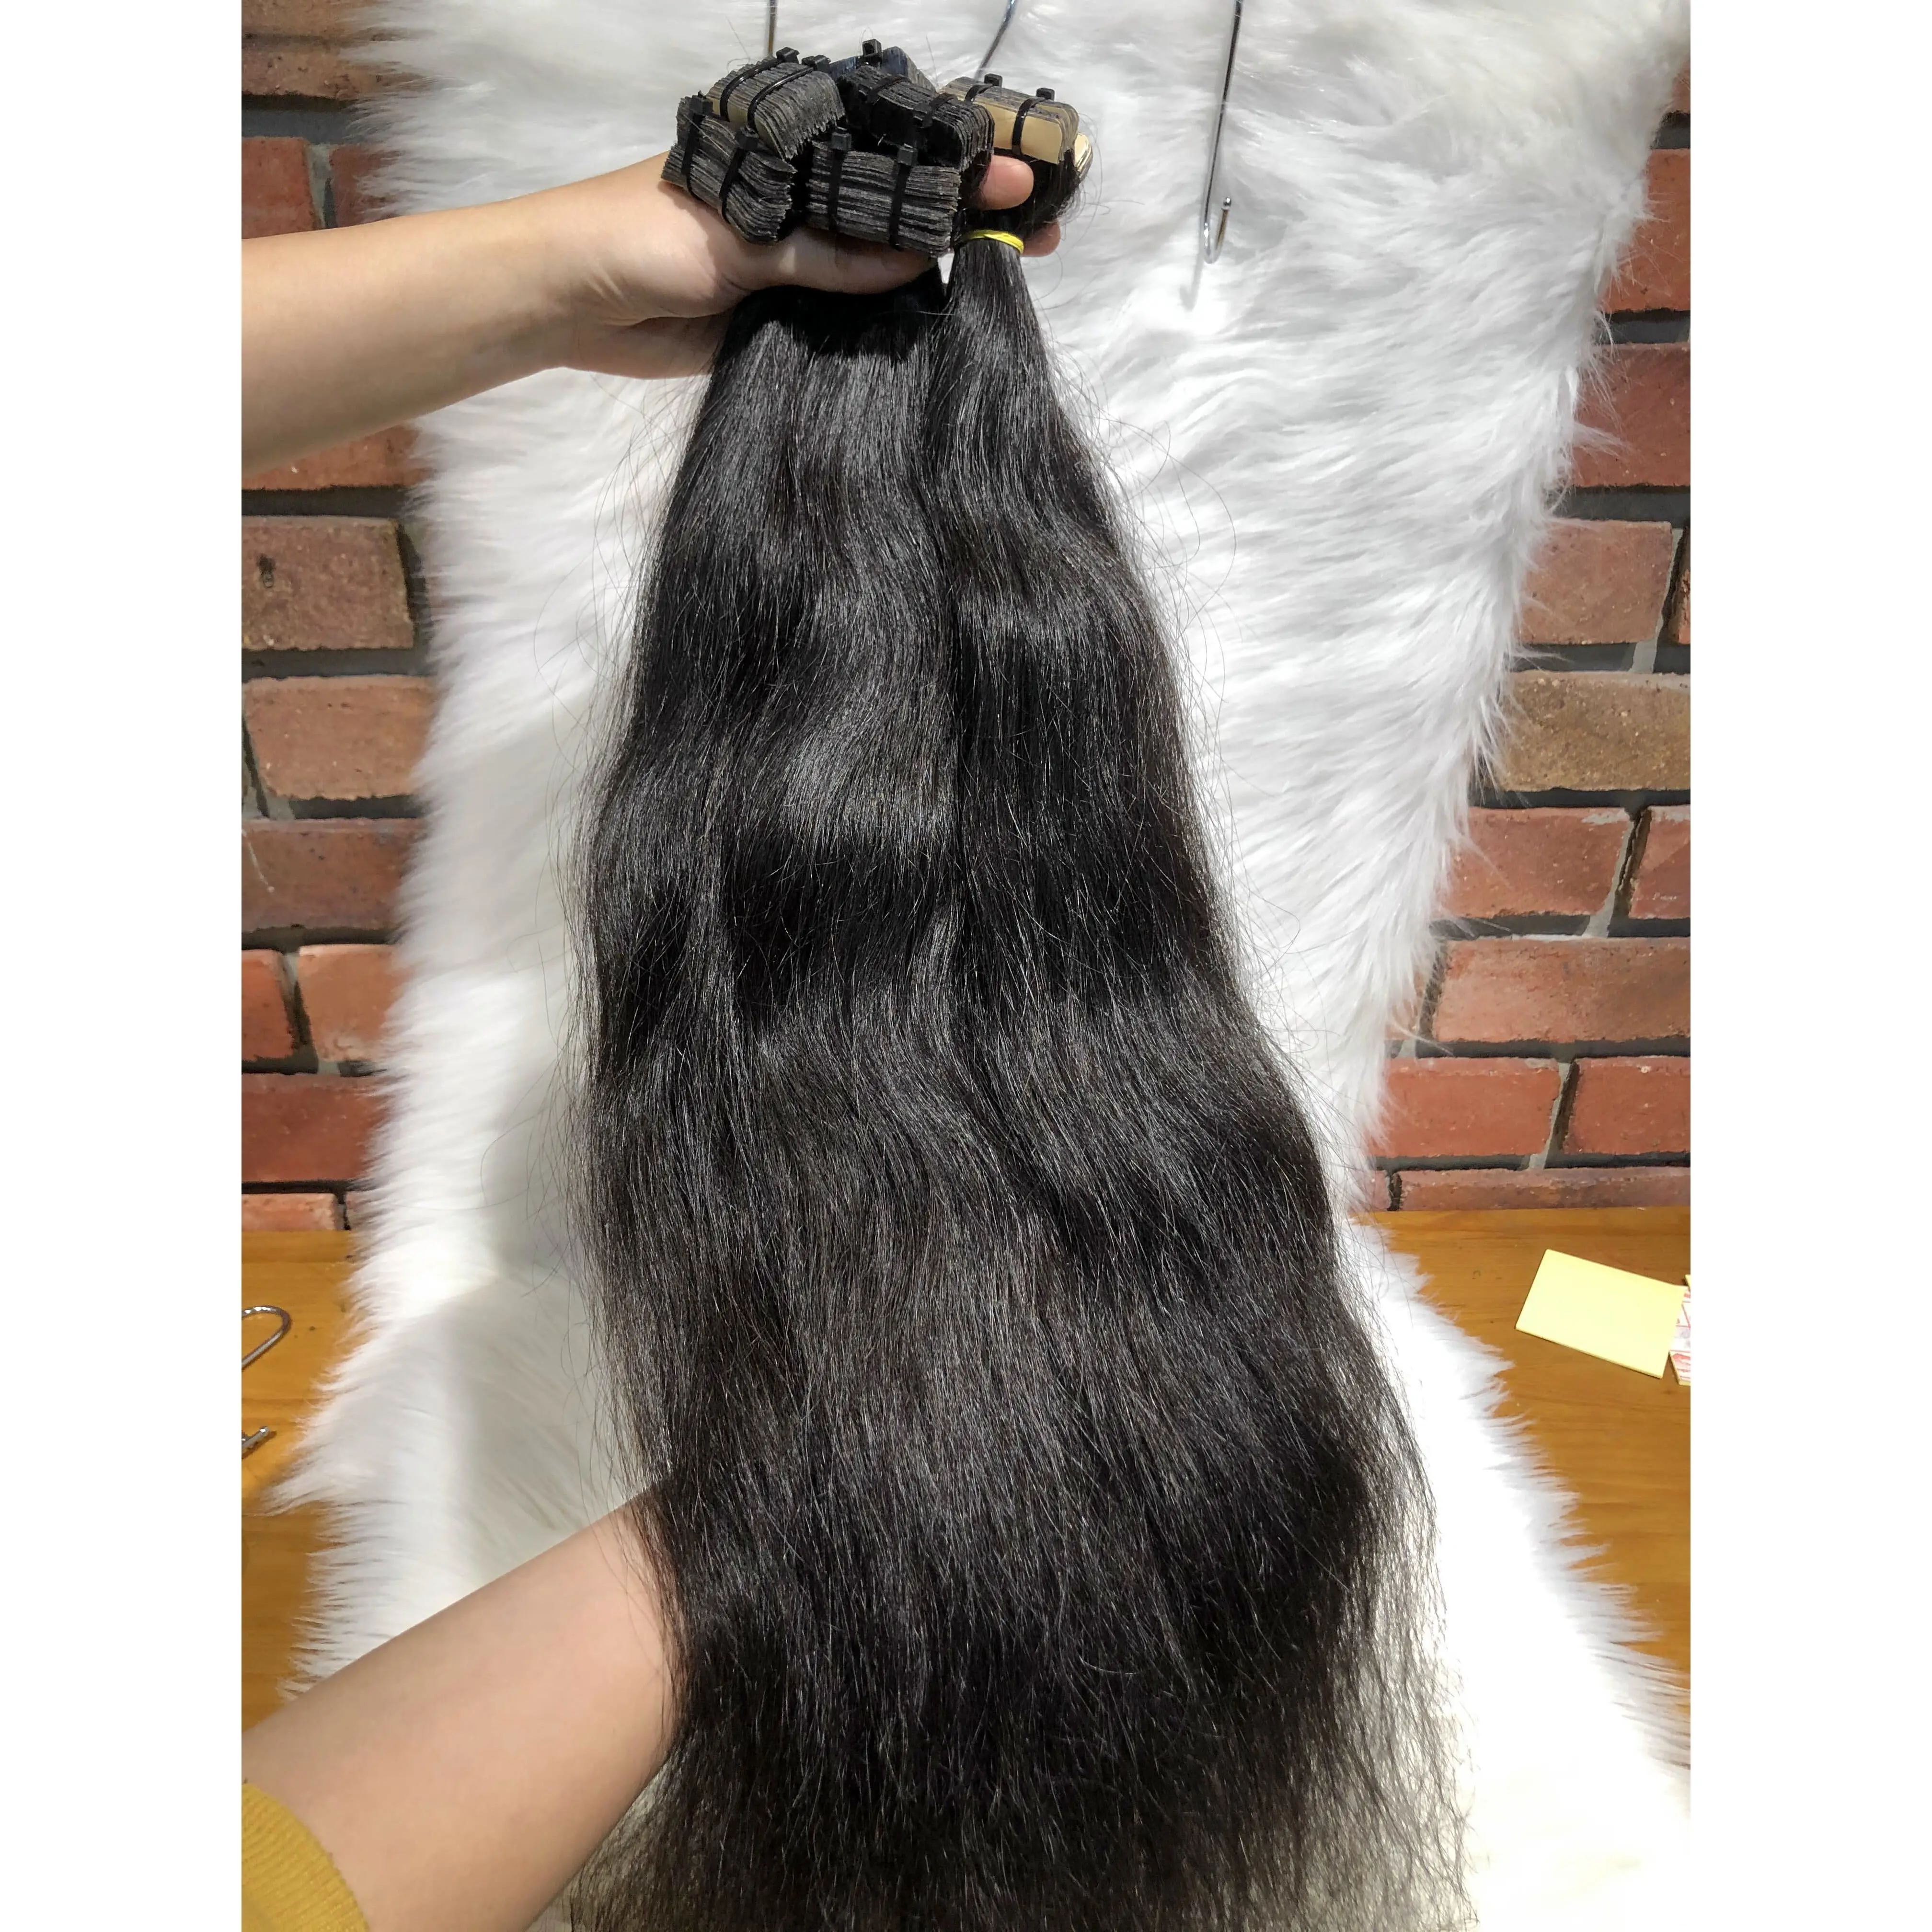 Wholesale hair extensions tape raw Cambodia hair, Cambodia virgin hair tape exensions, Michair Vietnam